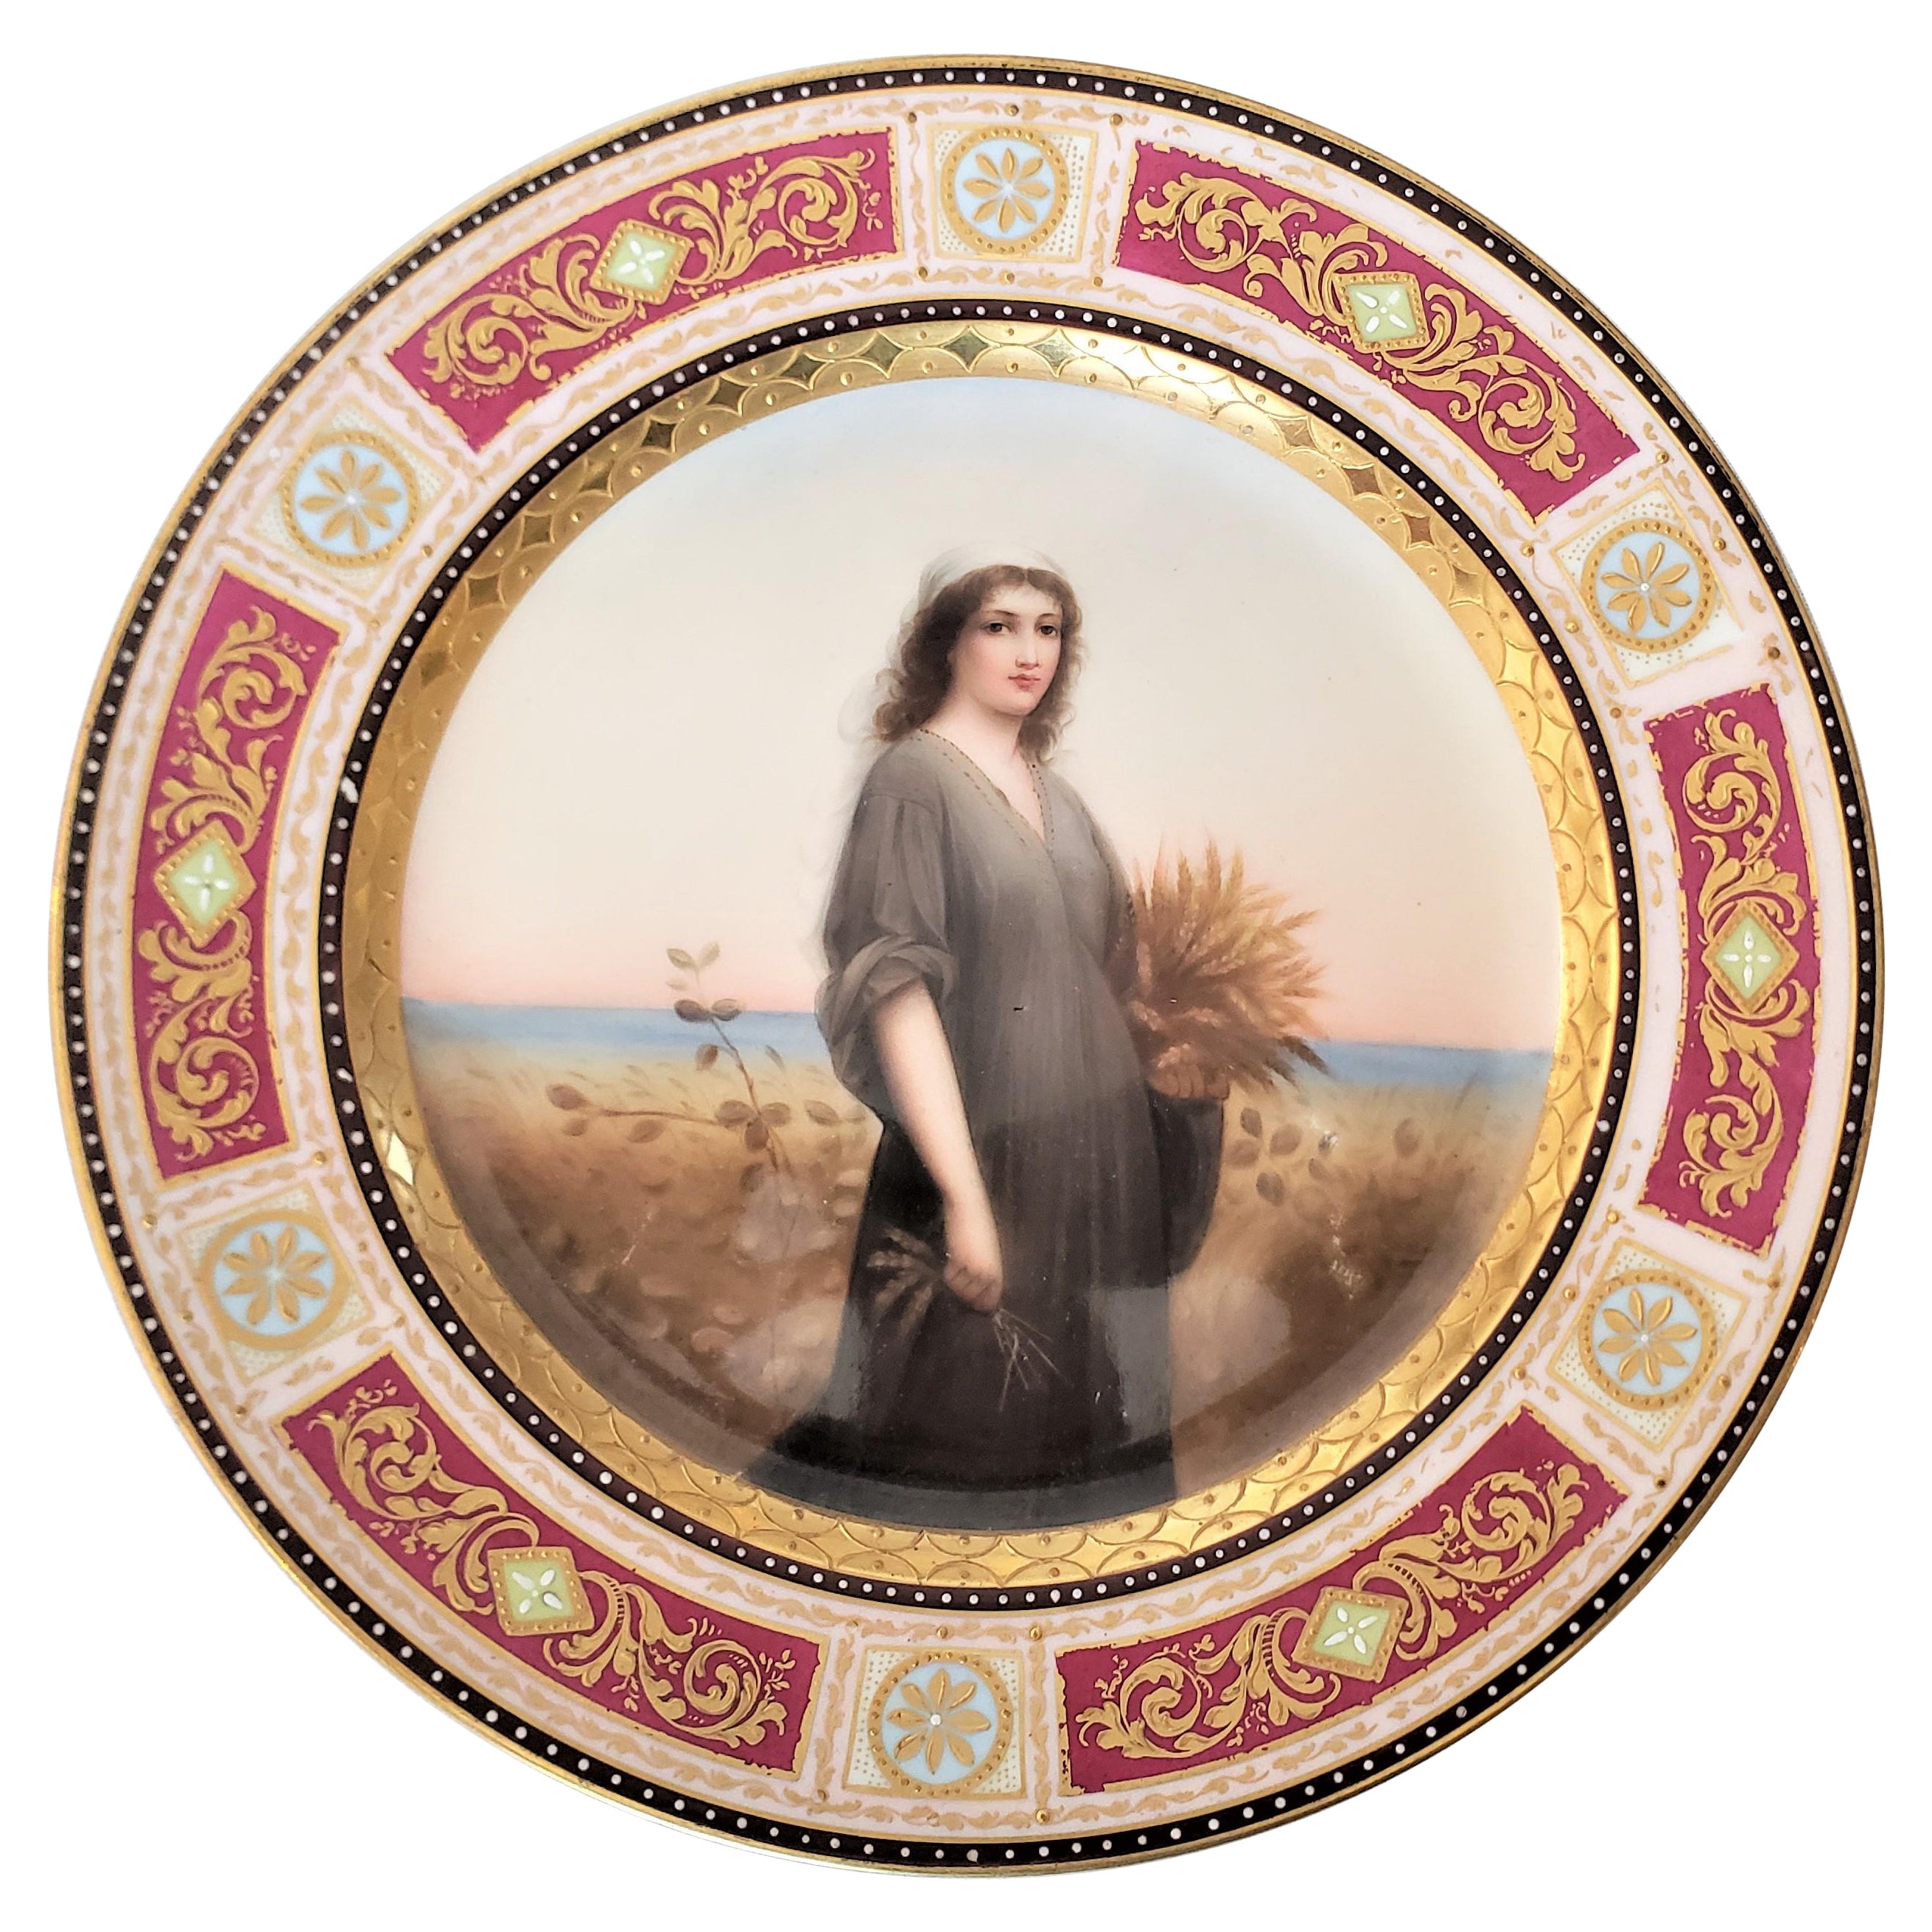 Antique KPM Hand-Painted Porcelain Cabinet Plate Depicting the Biblical "Ruth" For Sale